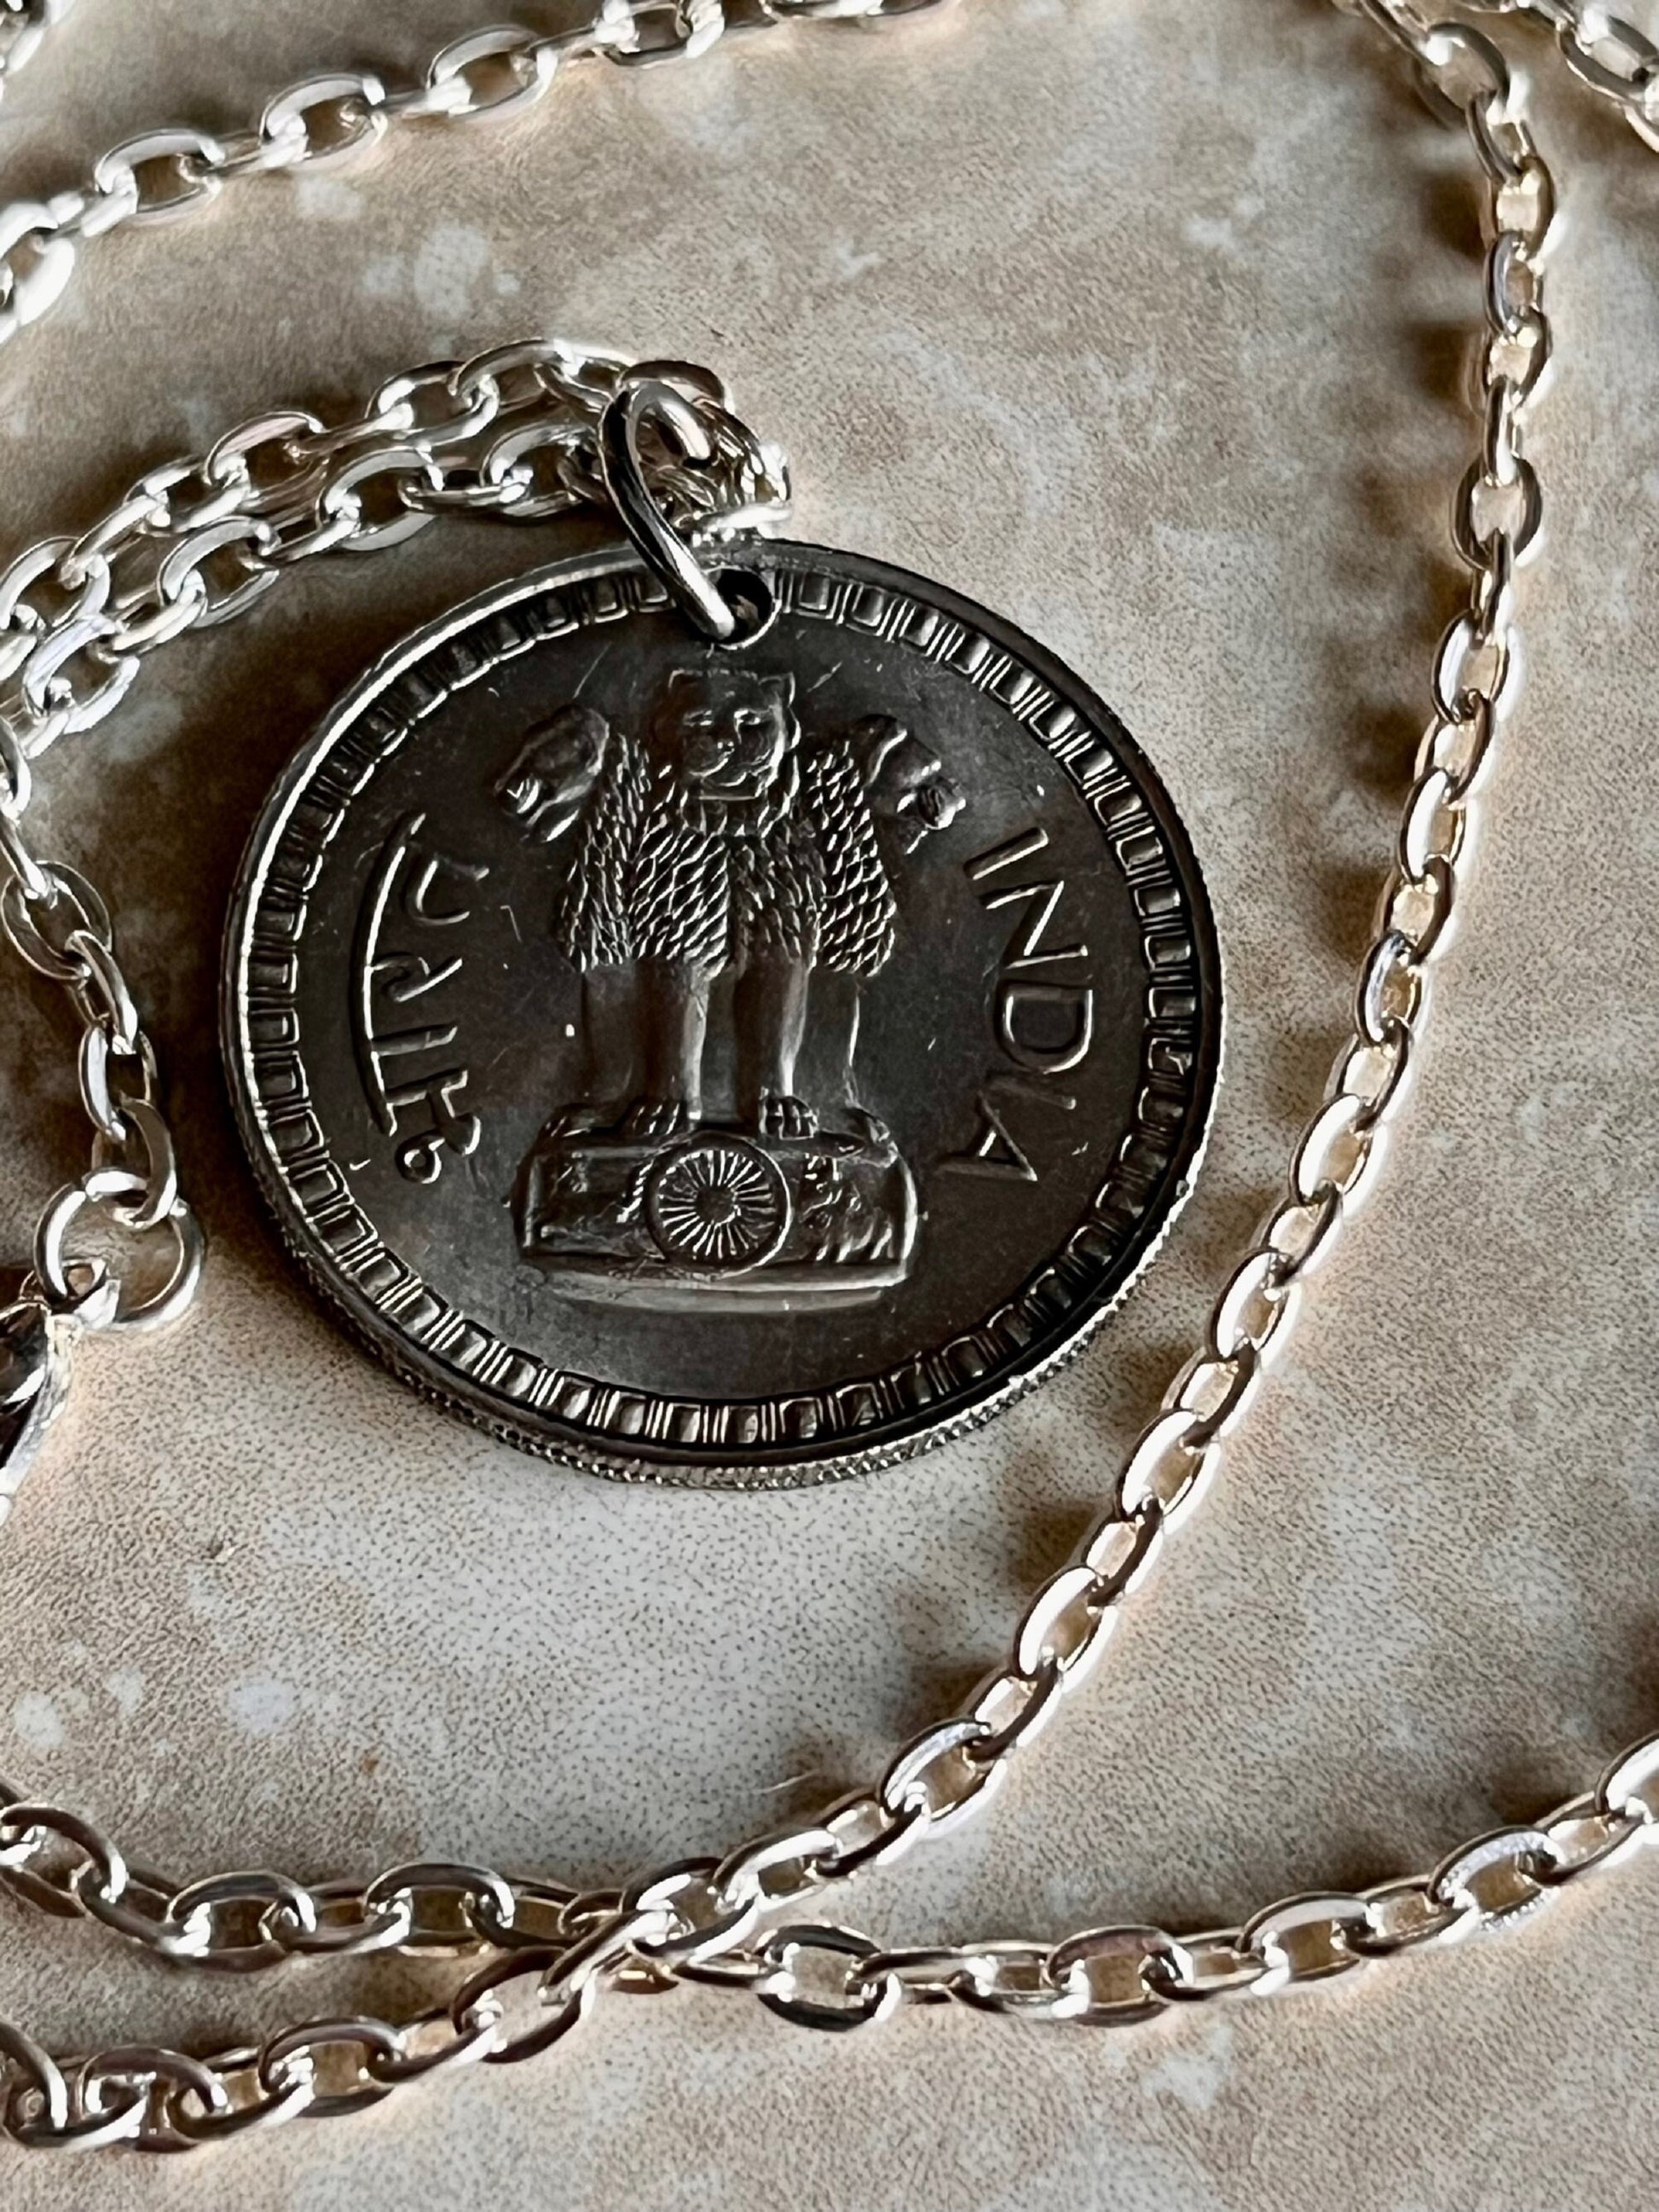 India Coin Necklace East India 1 Rupee Coin Pendant Personal Old Vintage Handmade Jewelry Gift Friend Charm For Him Her World Coin Collector